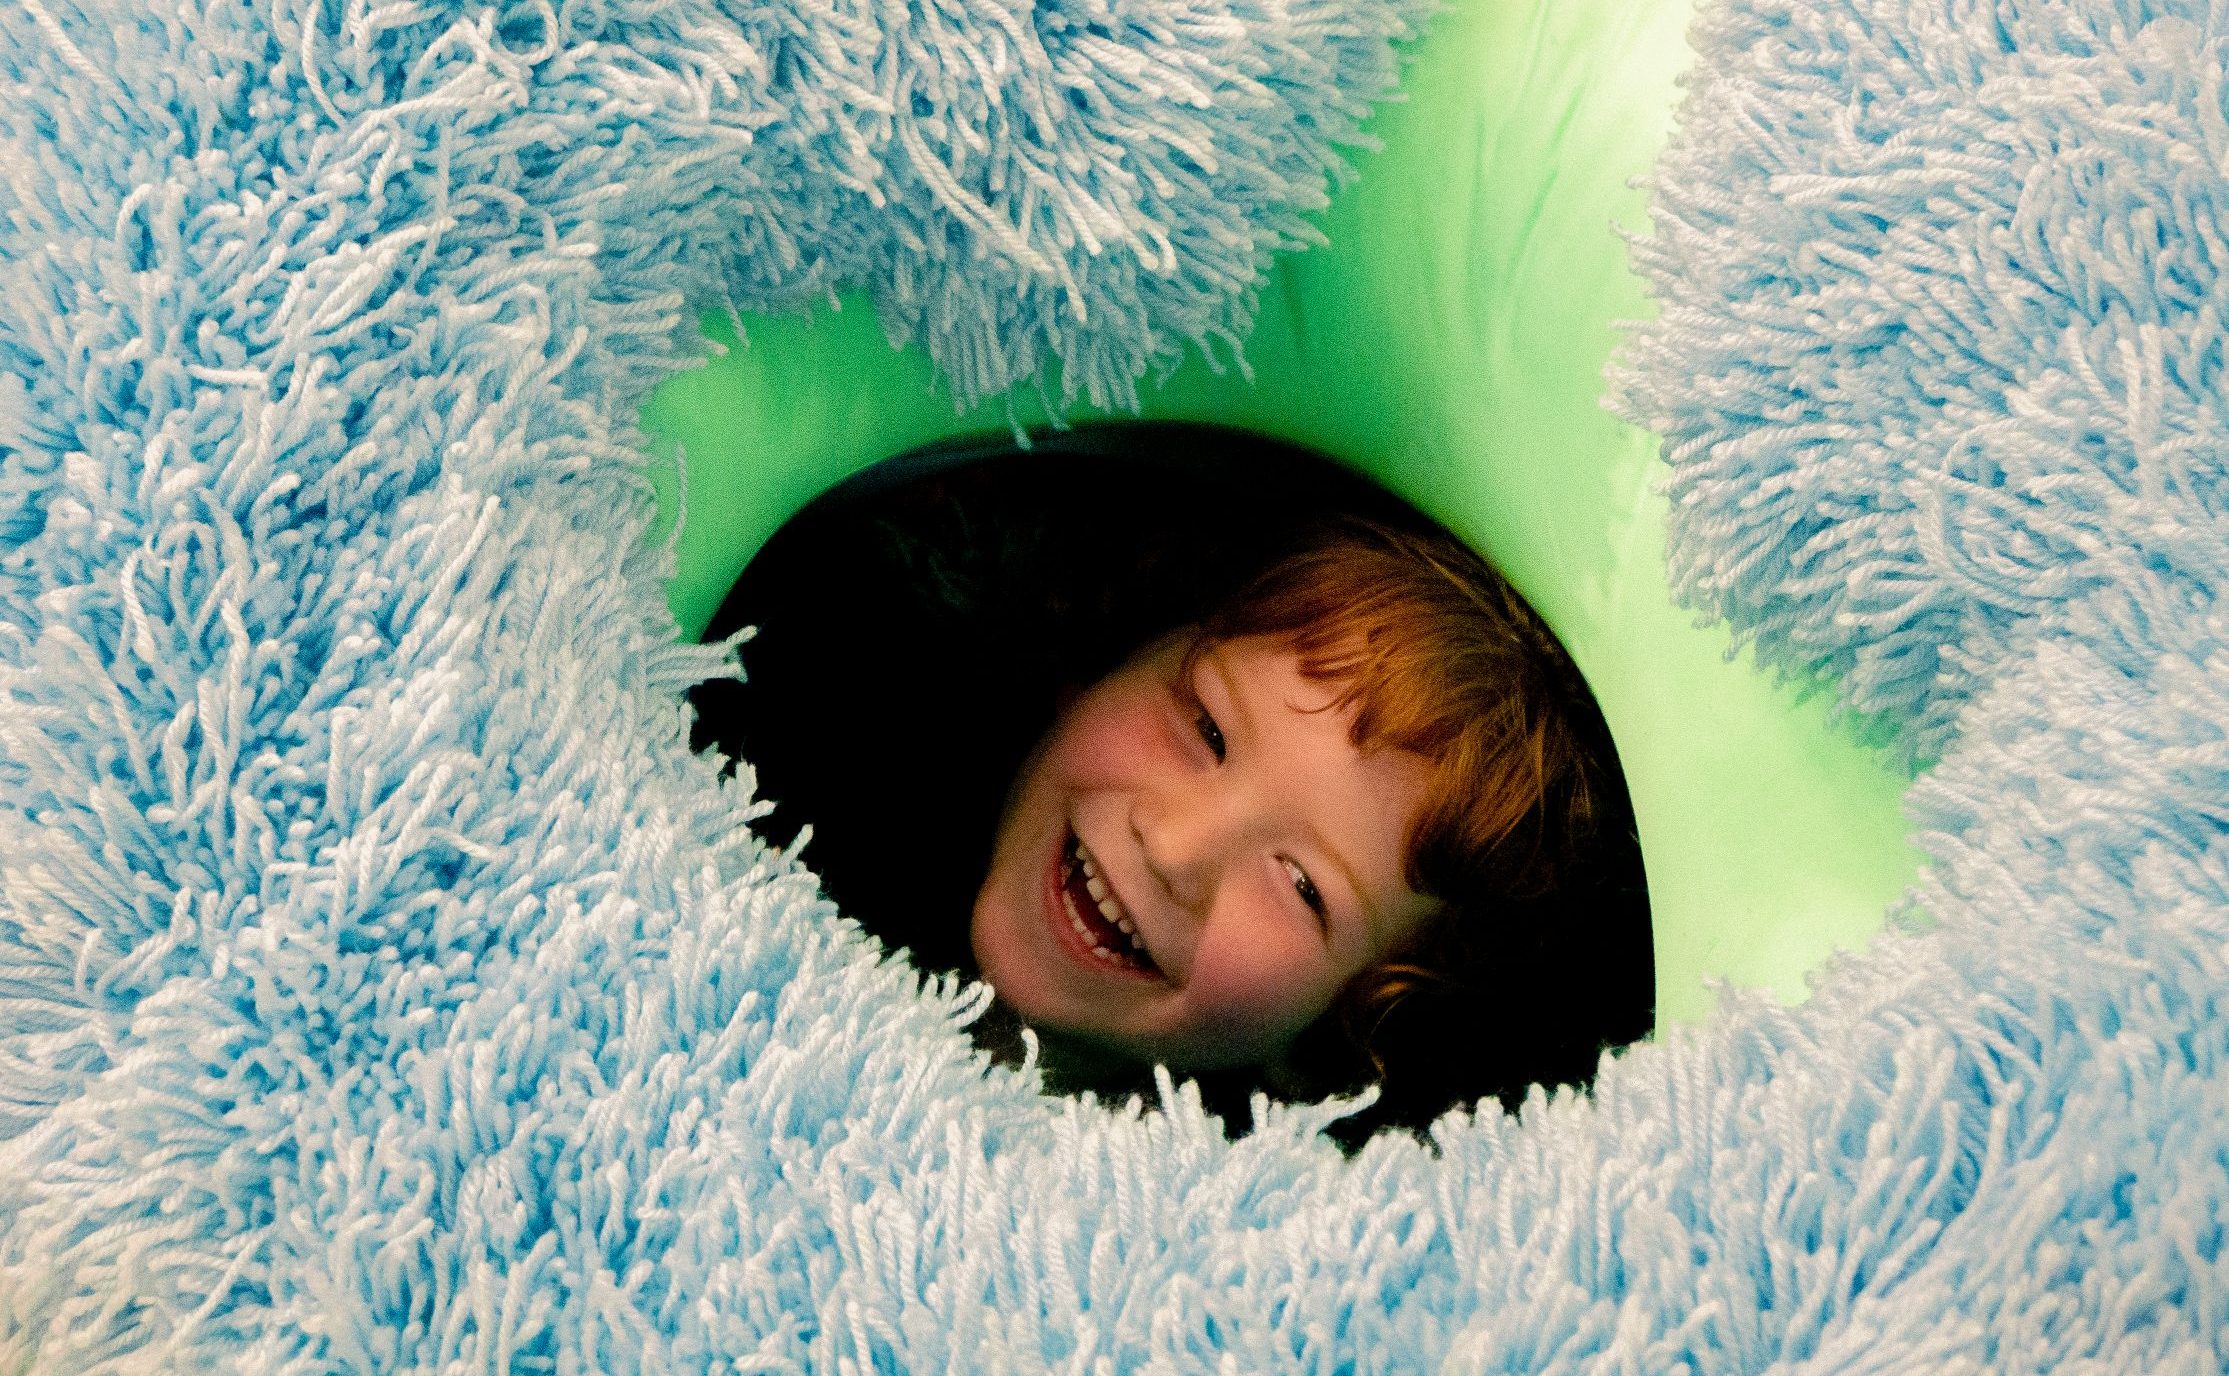 A child peaks through a pile of fluffy play cushions.